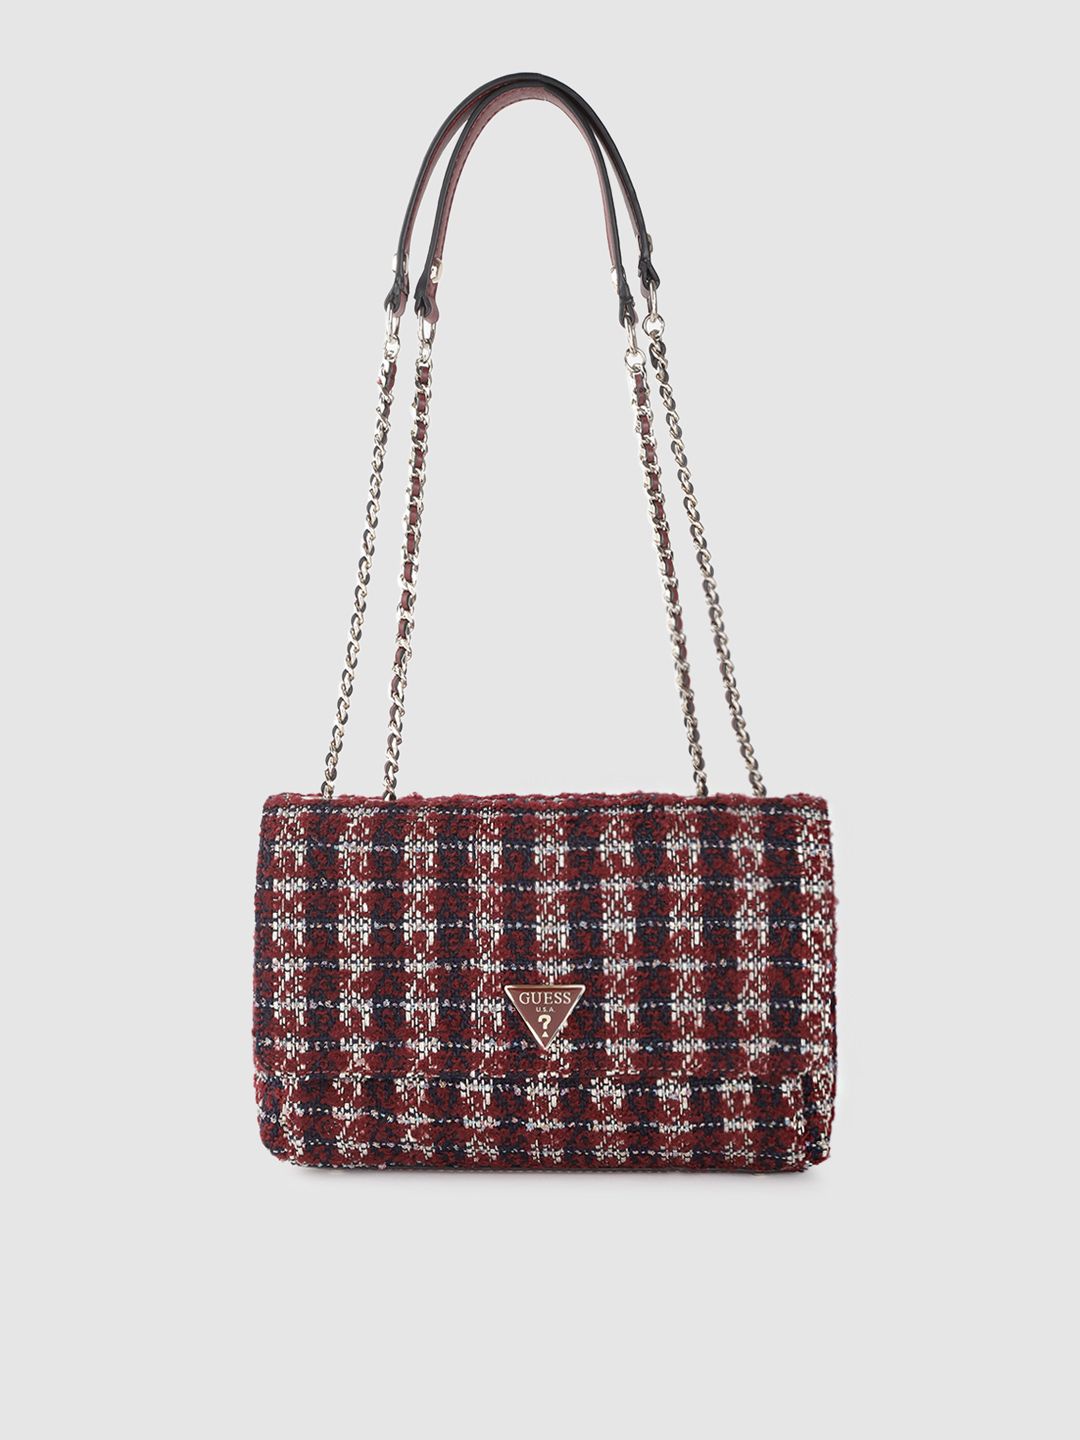 GUESS Maroon & Off-White Self Design Shoulder Bag Price in India